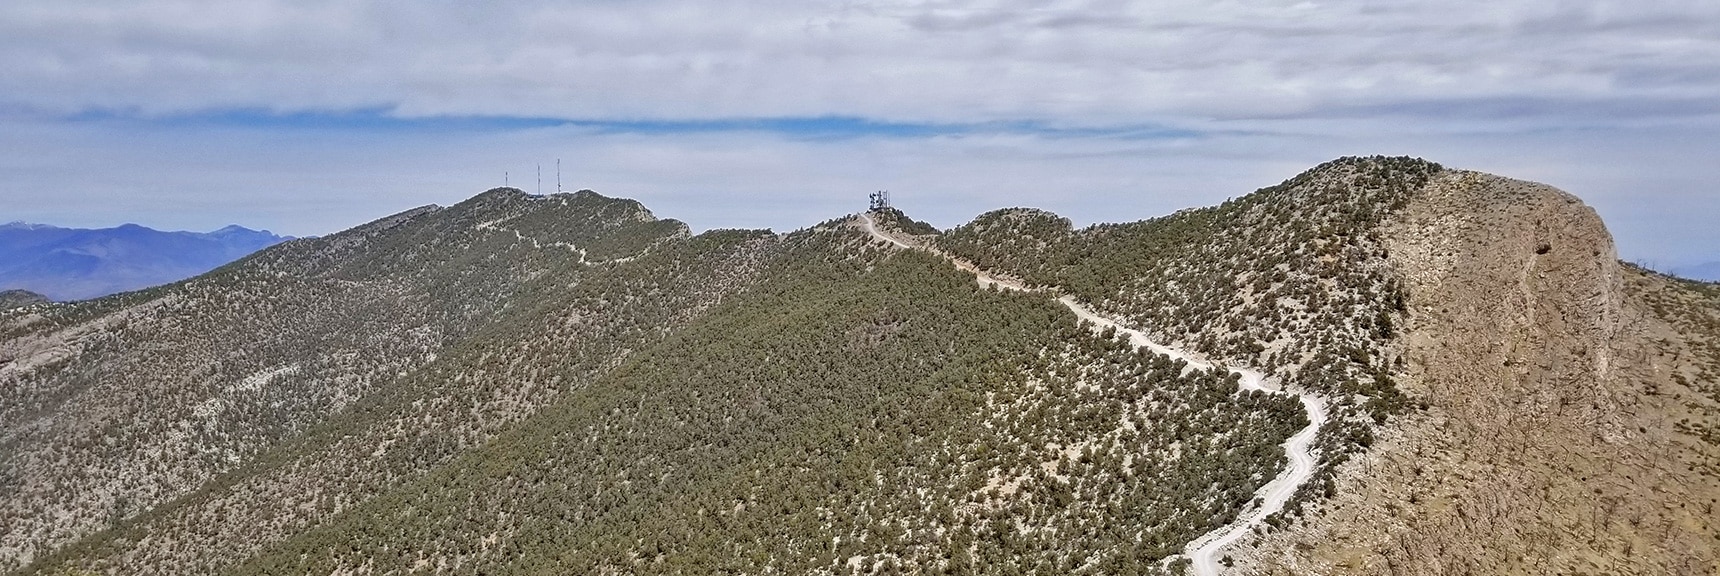 Mid-Summit, North Summit and Approach Road Viewed from the South Summit | Potosi Mountain Spring Mountains Nevada